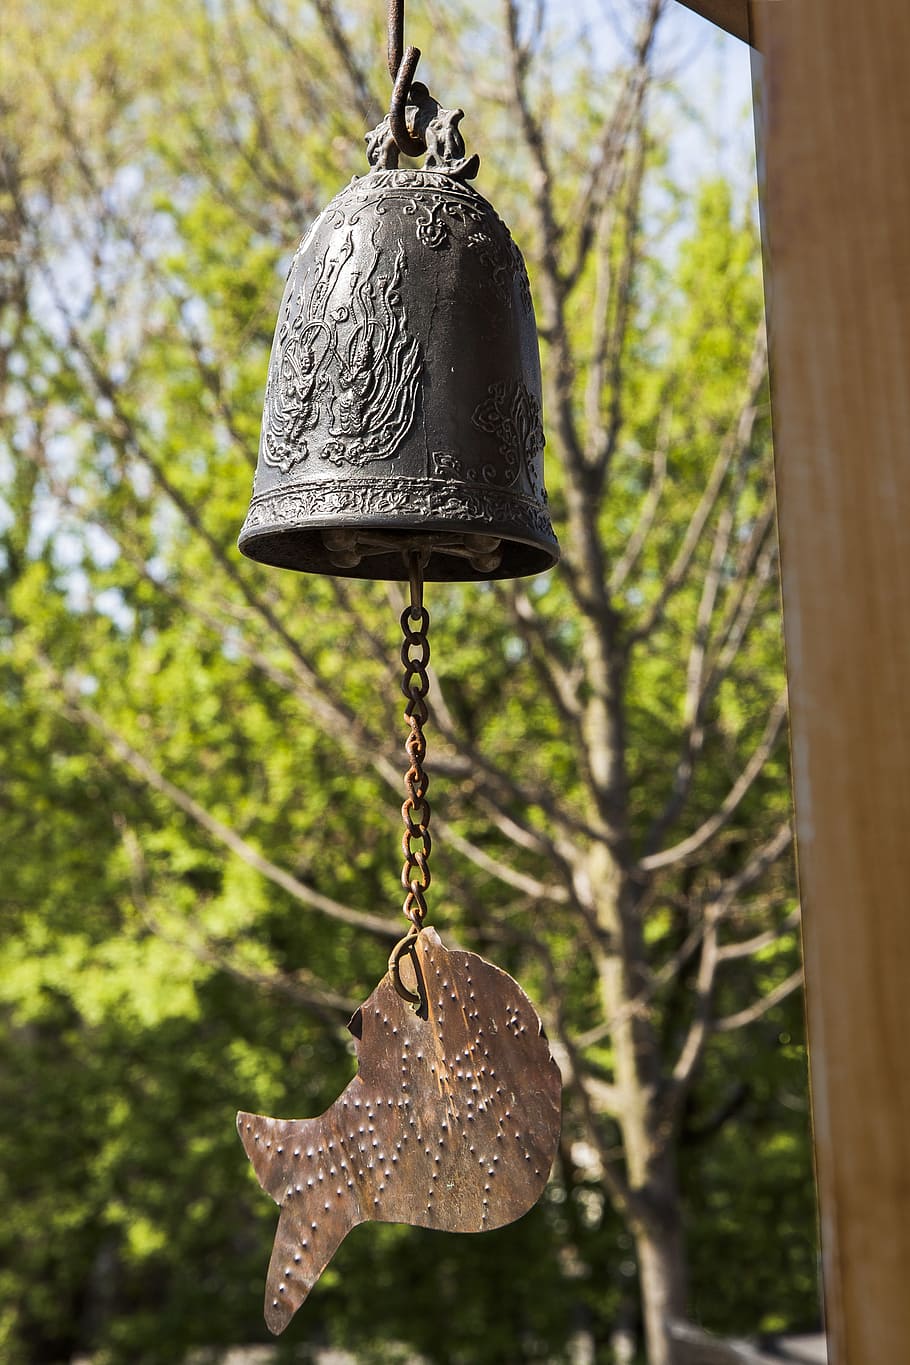 berlin, garden, park, gardens of the world, focus on foreground, tree, hanging, plant, day, bell